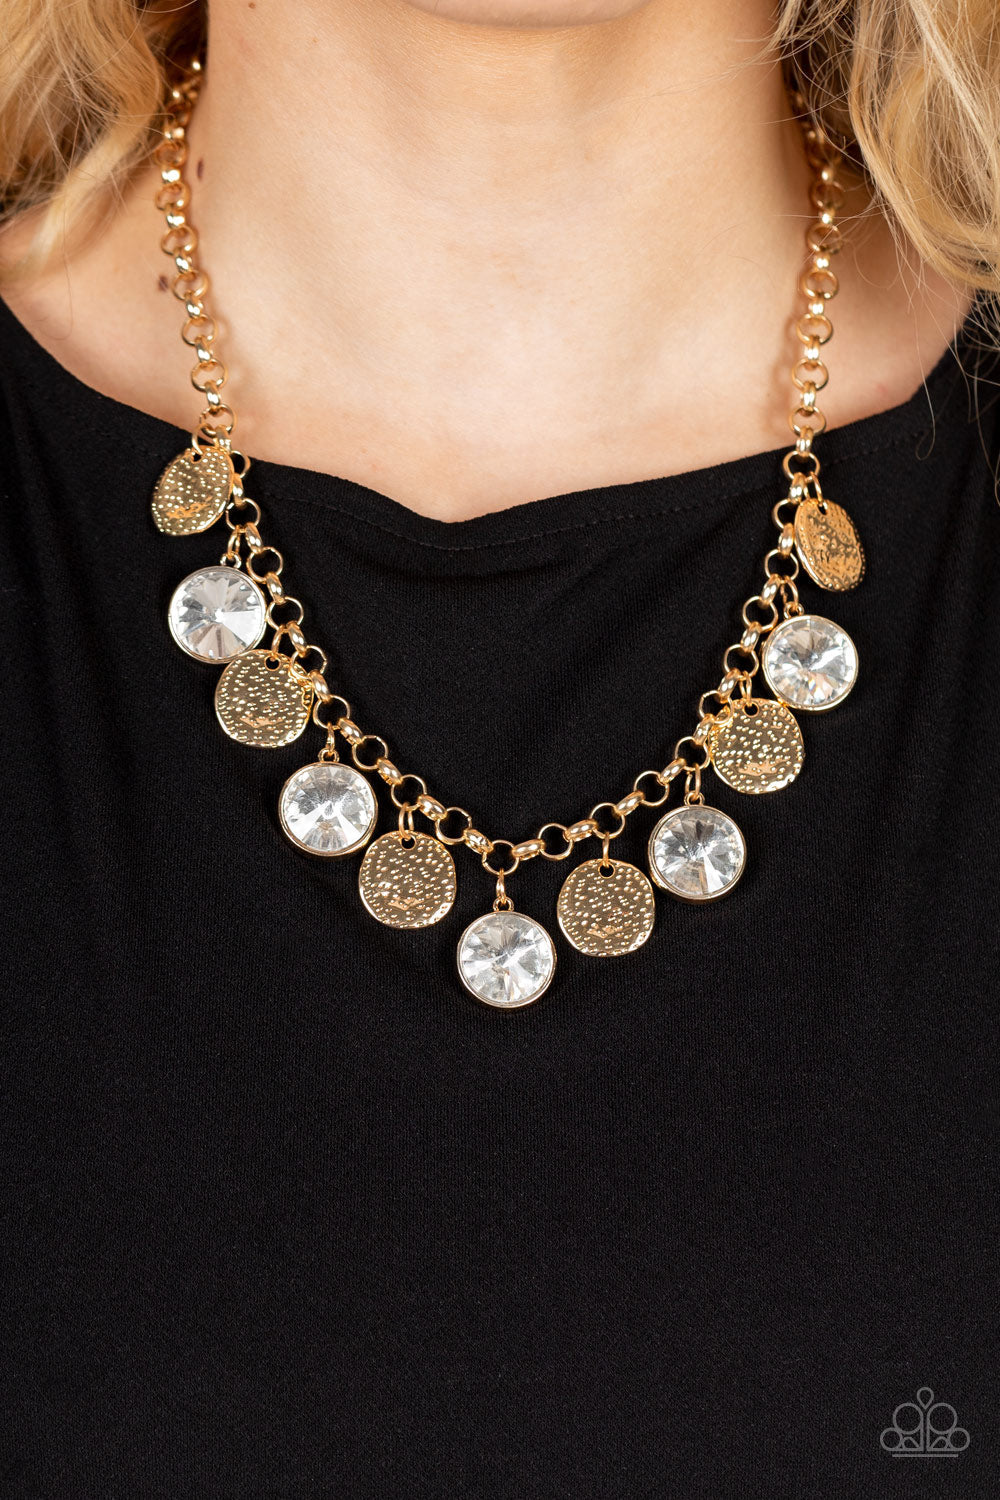 Spot On Sparkle - Gold Gem Necklace - Paparazzi Accessories - Hammered gold discs and oversized white gems swing from the bottom of a bold gold chain, creating noise-making sparkle below the collar. Features an adjustable clasp closure.